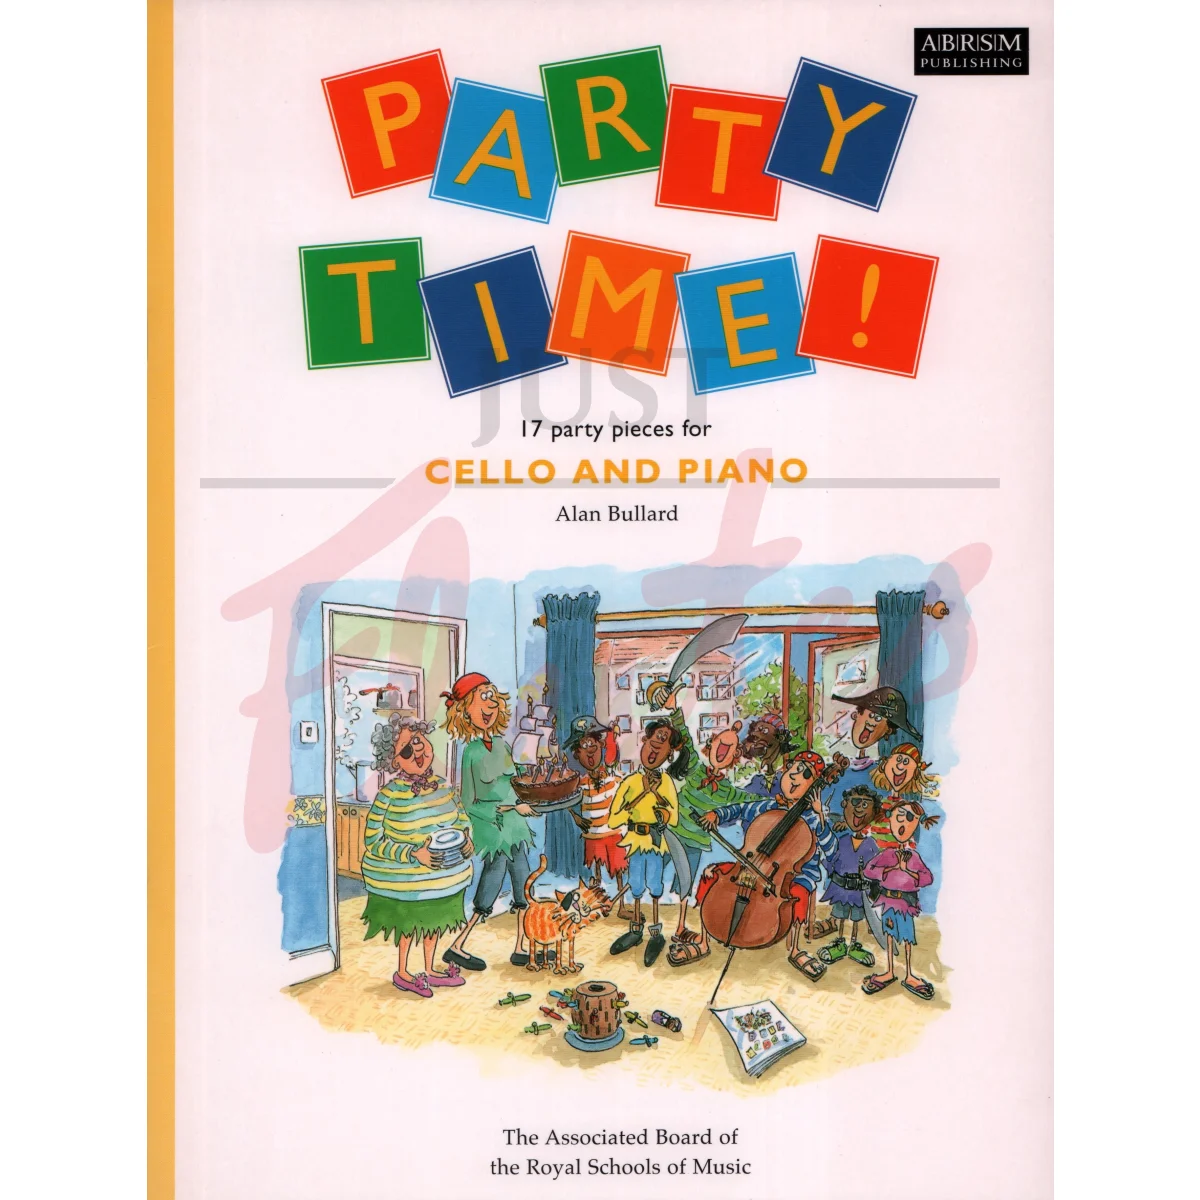 Party Time! for Cello and Piano